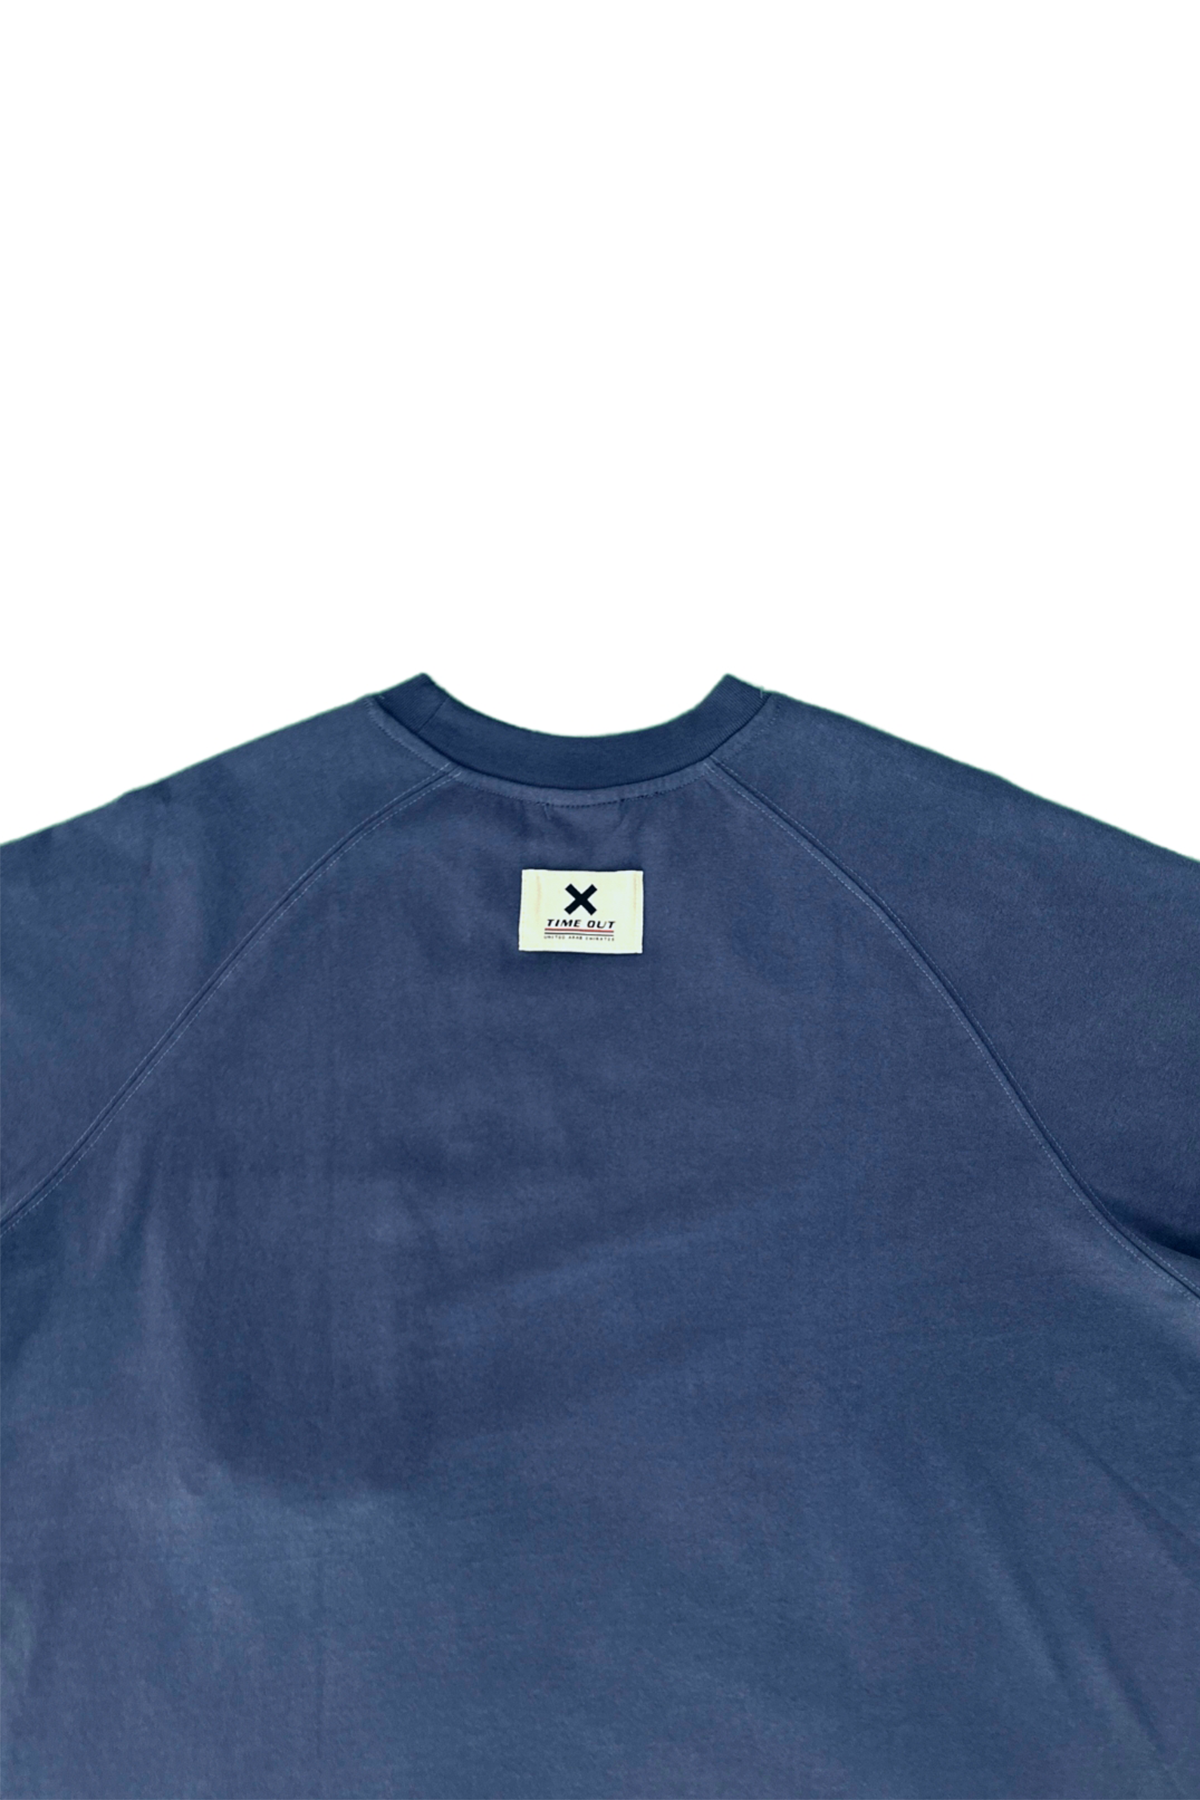 Oversized-Front-Pocket-Tee-with-Raglan-Sleeves-Unisex-back-closeup